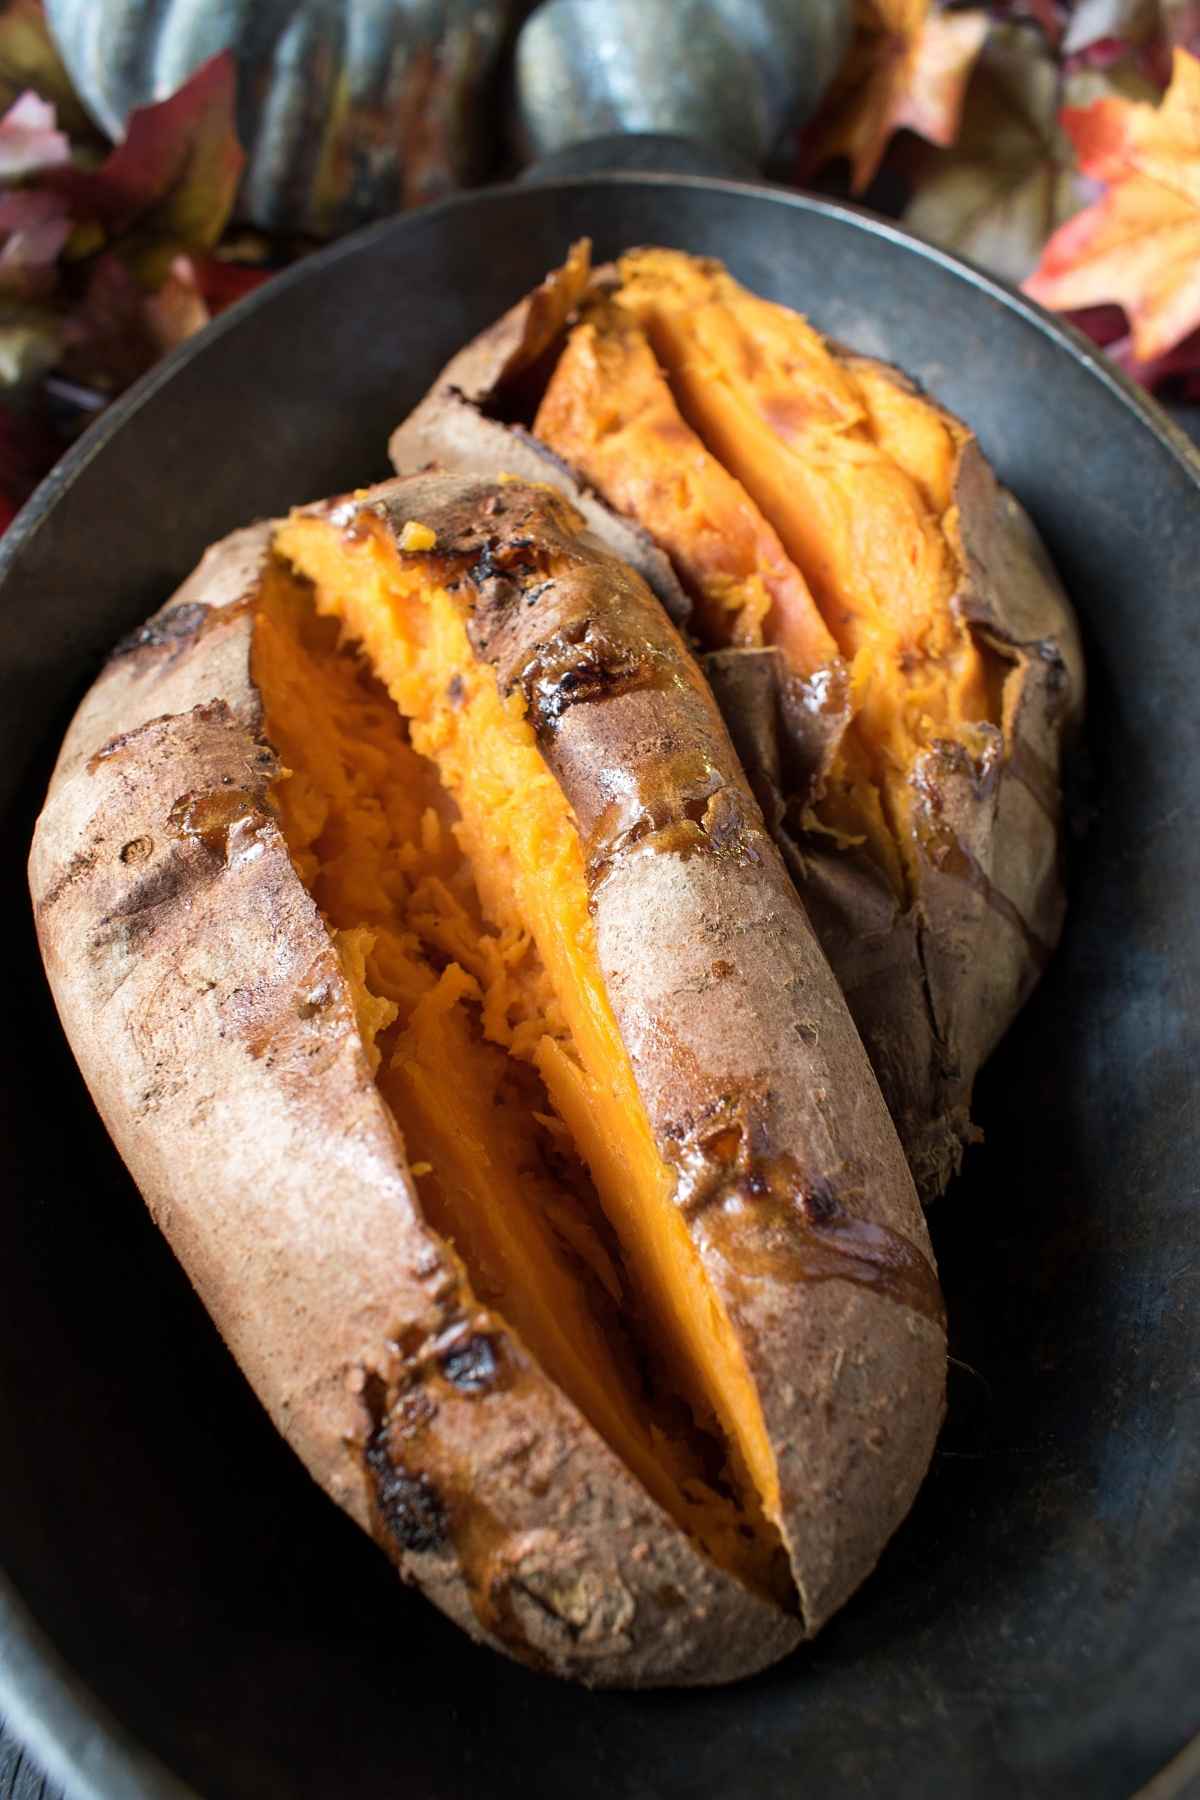 Using a microwave to cook sweet potatoes is a fast and convenient way to get dinner on the table. This recipe for Microwave Sweet Potato takes just 10 minutes, and you’ll love how tender and flavorful the potato turns out.